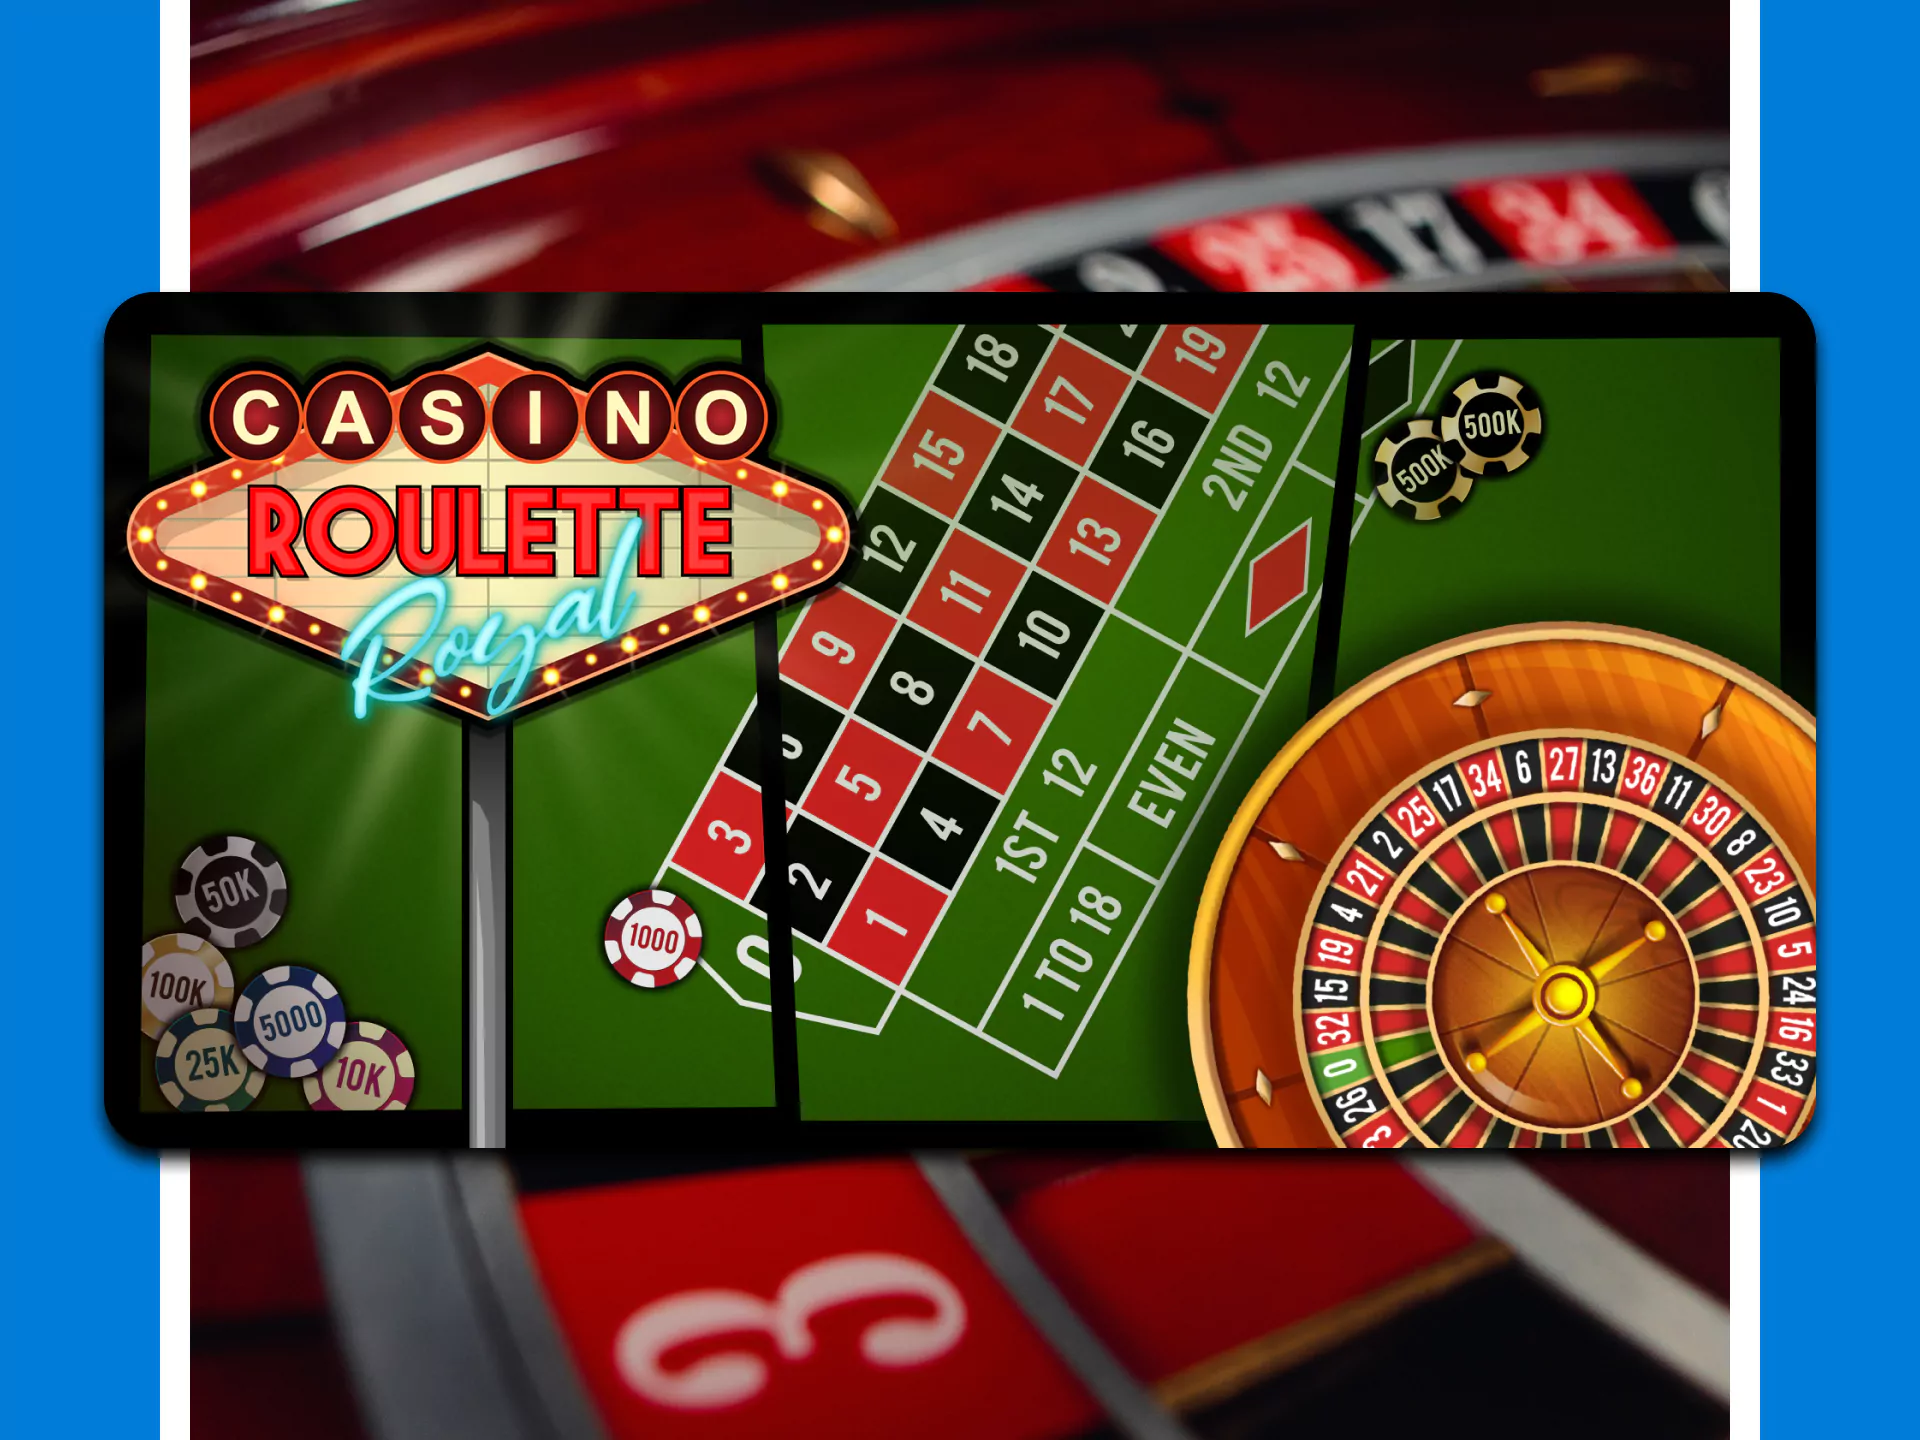 Find a Roulette on the Crickex website to start playing.